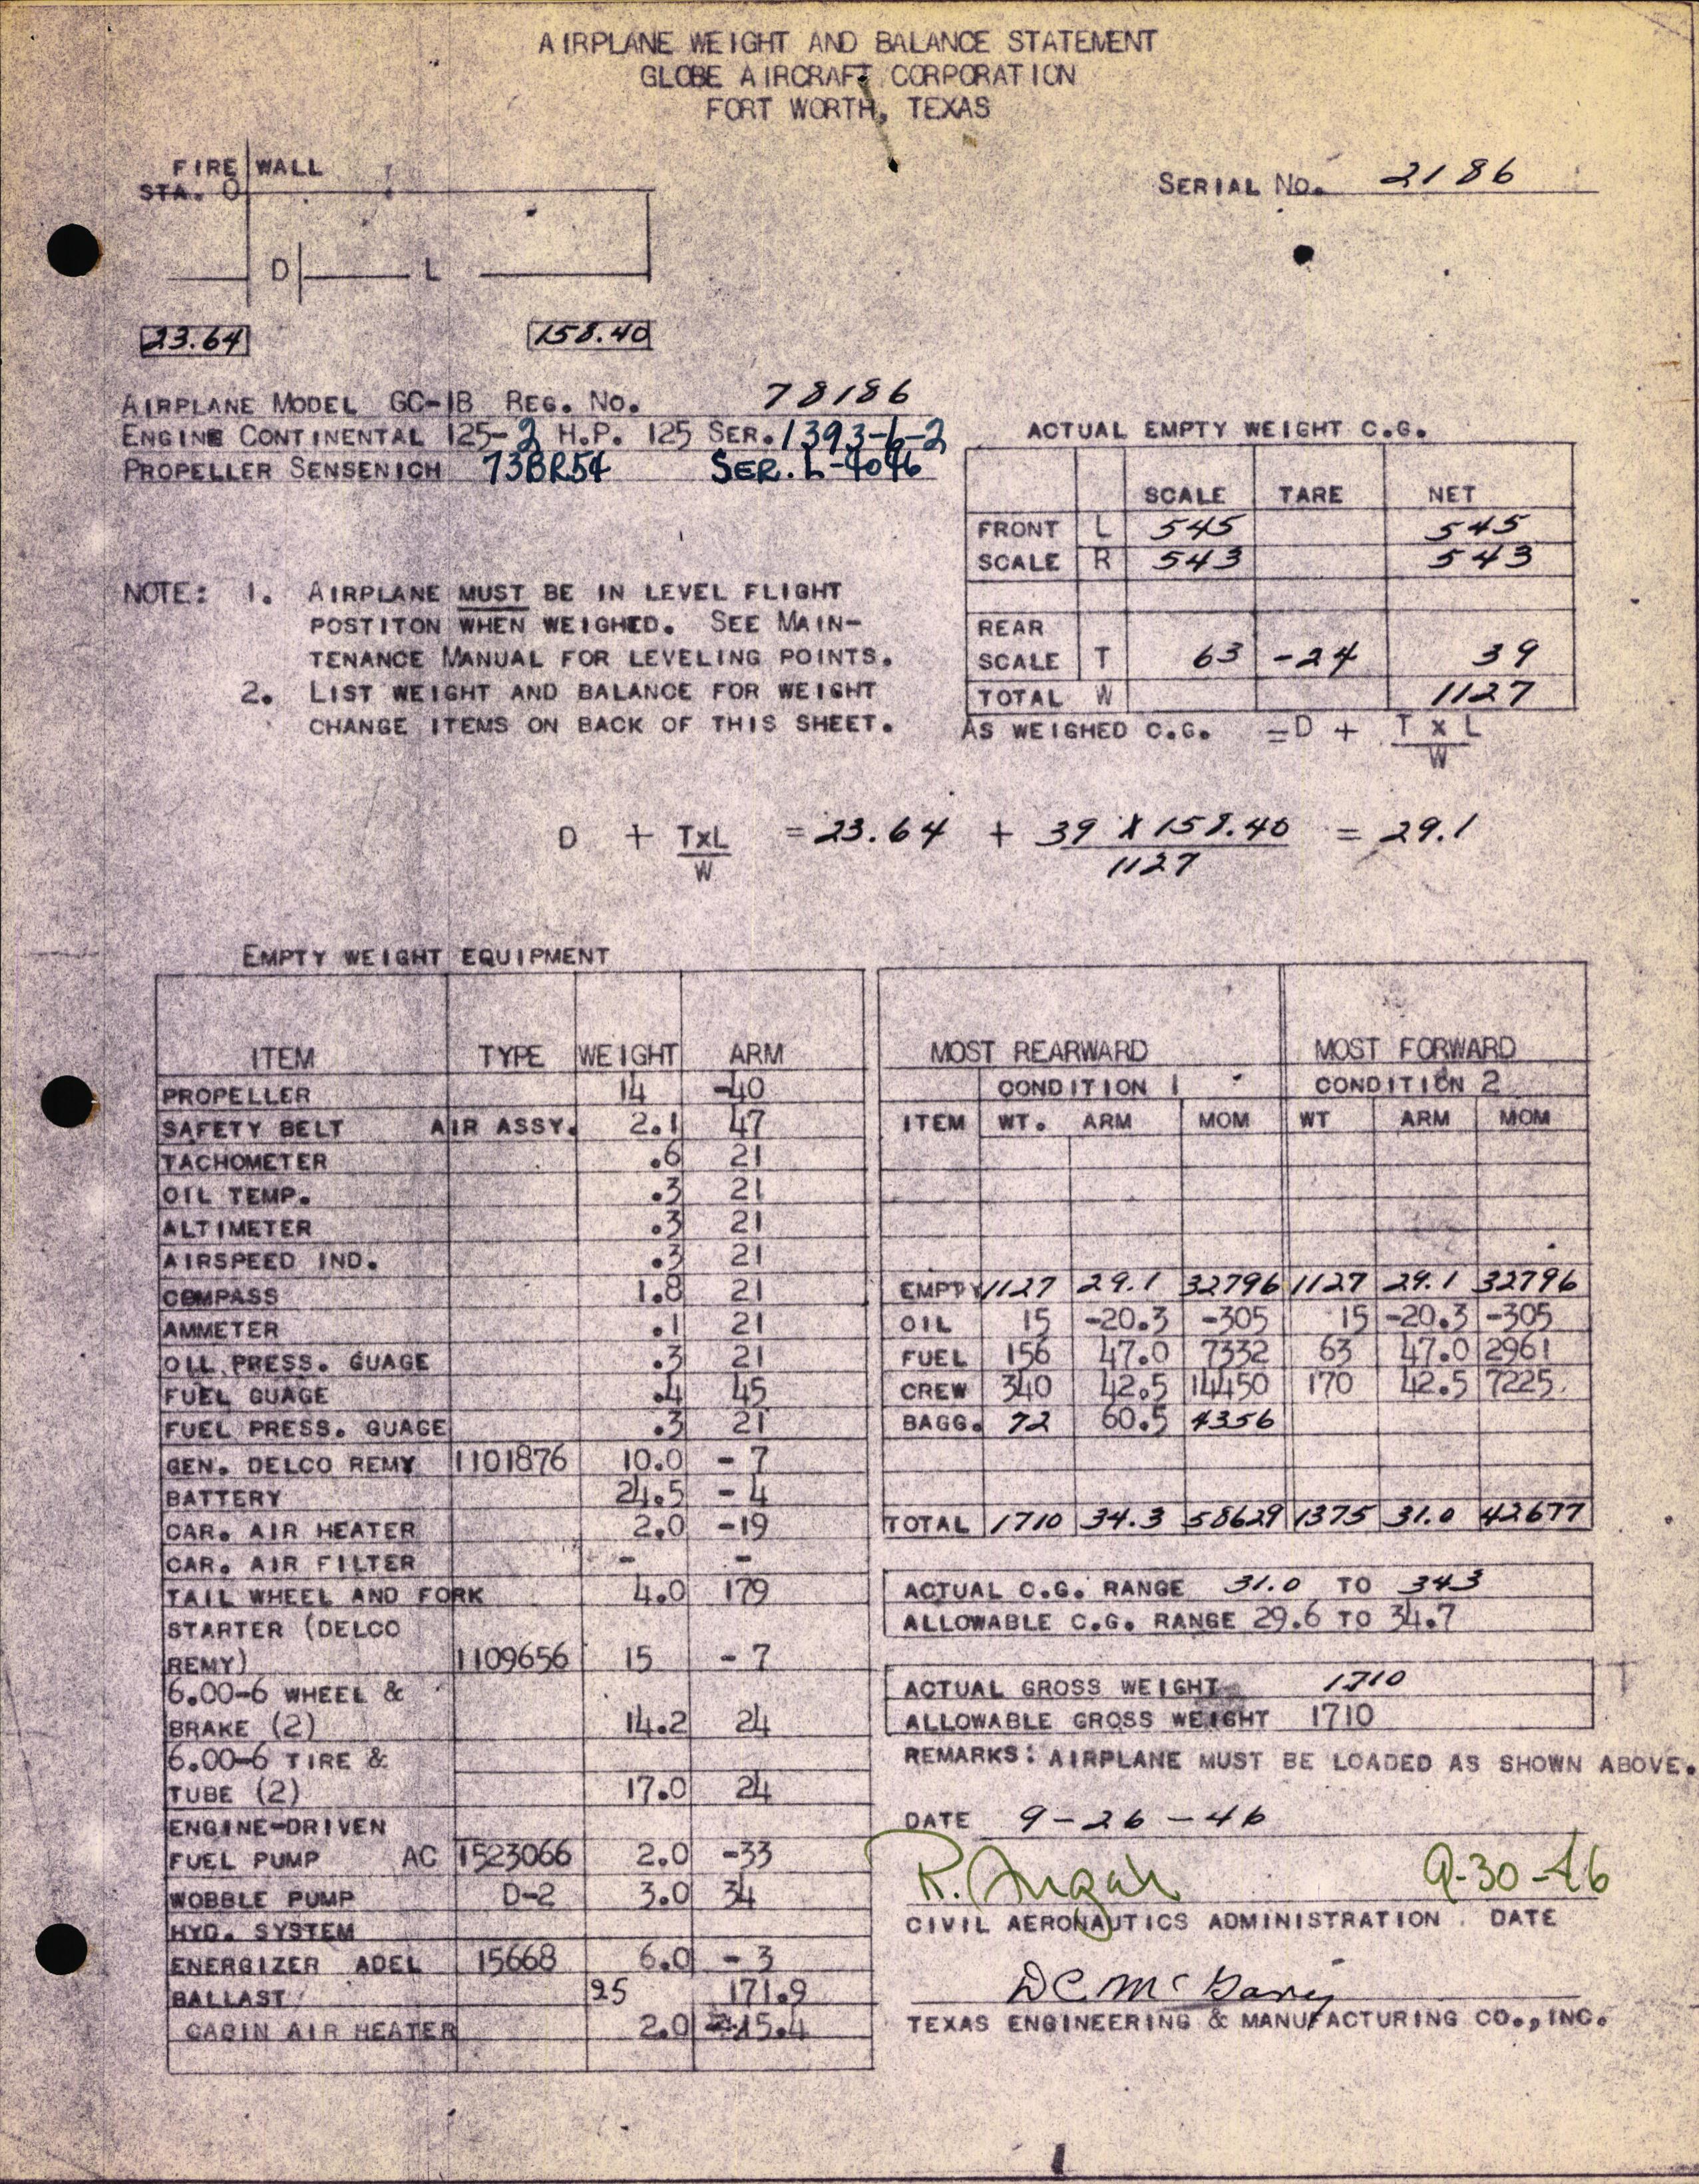 Sample page 1 from AirCorps Library document: Technical Information for Serial Number 2186